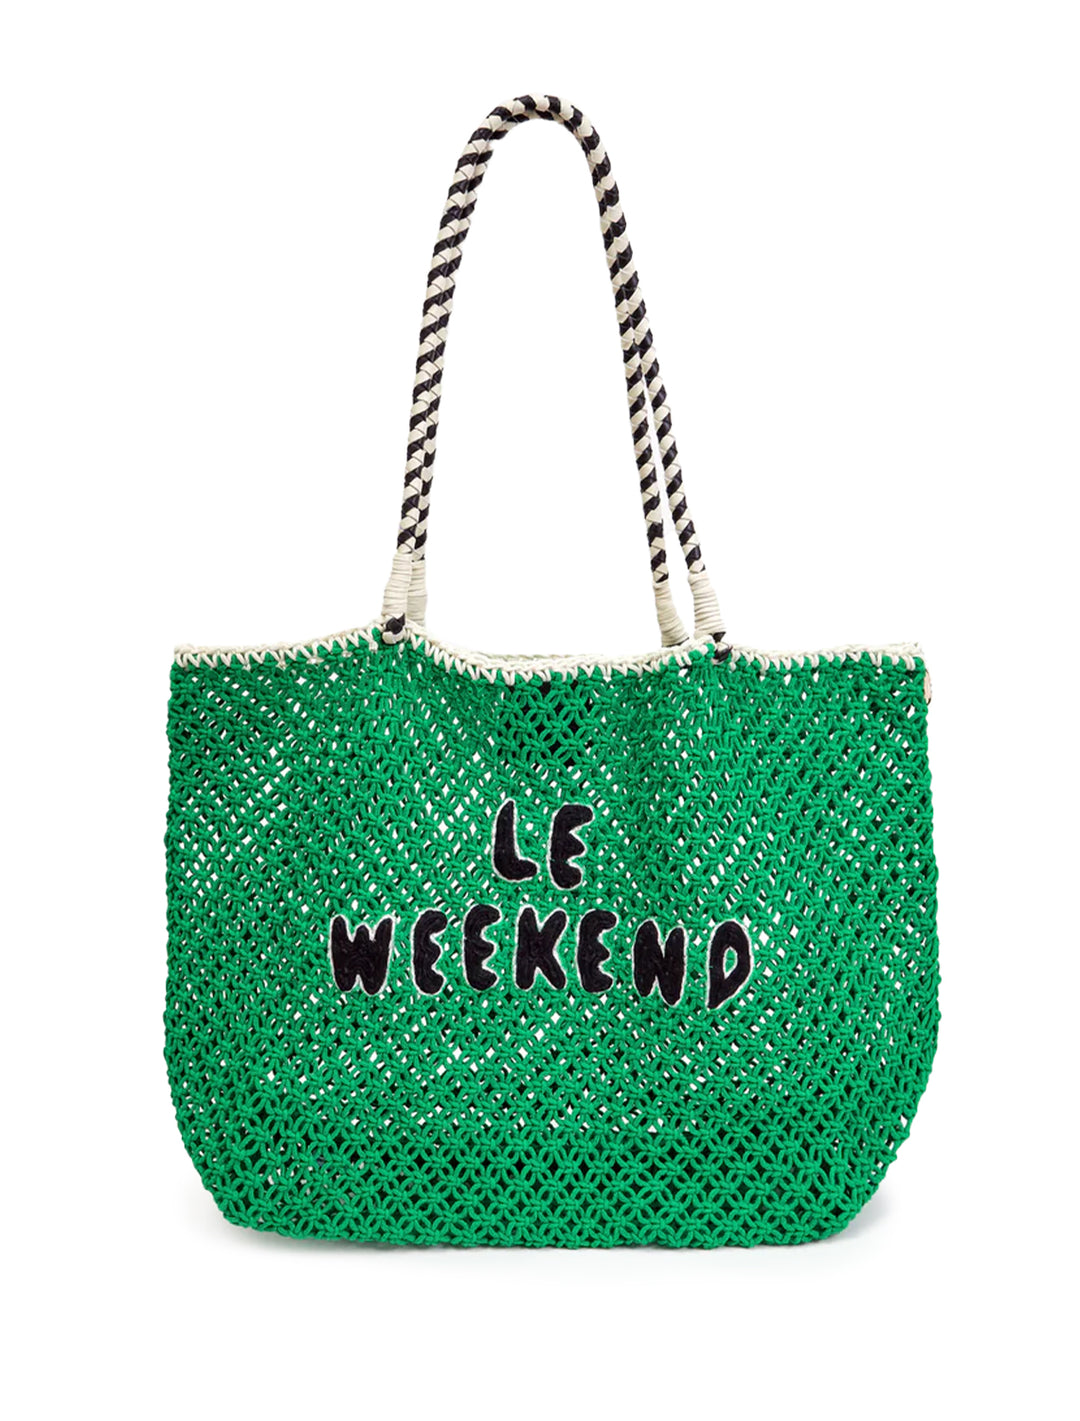 Front view of Clare V.'s lete tote | green crochet le weekend.